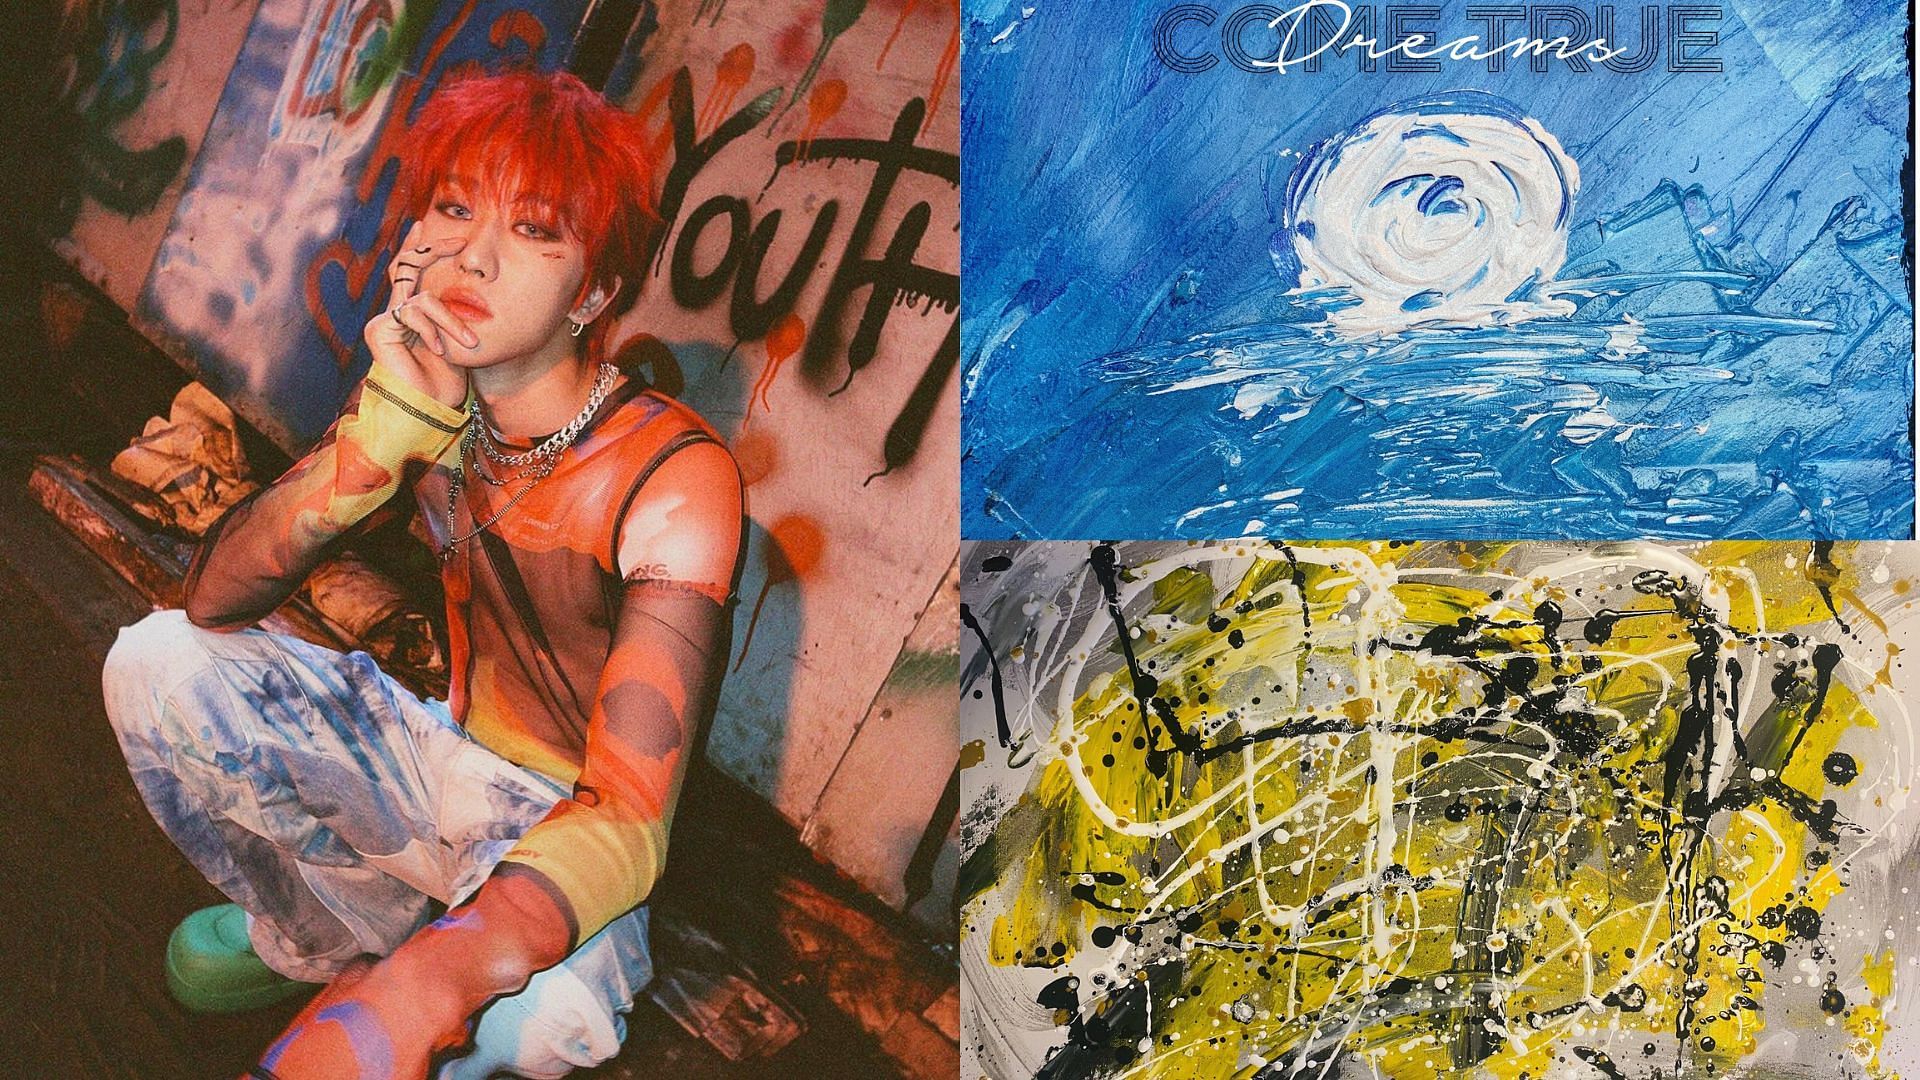 Minghao, aka The8, is a talented painter (Images via Instagram/@xuminghao_o and Twitter)